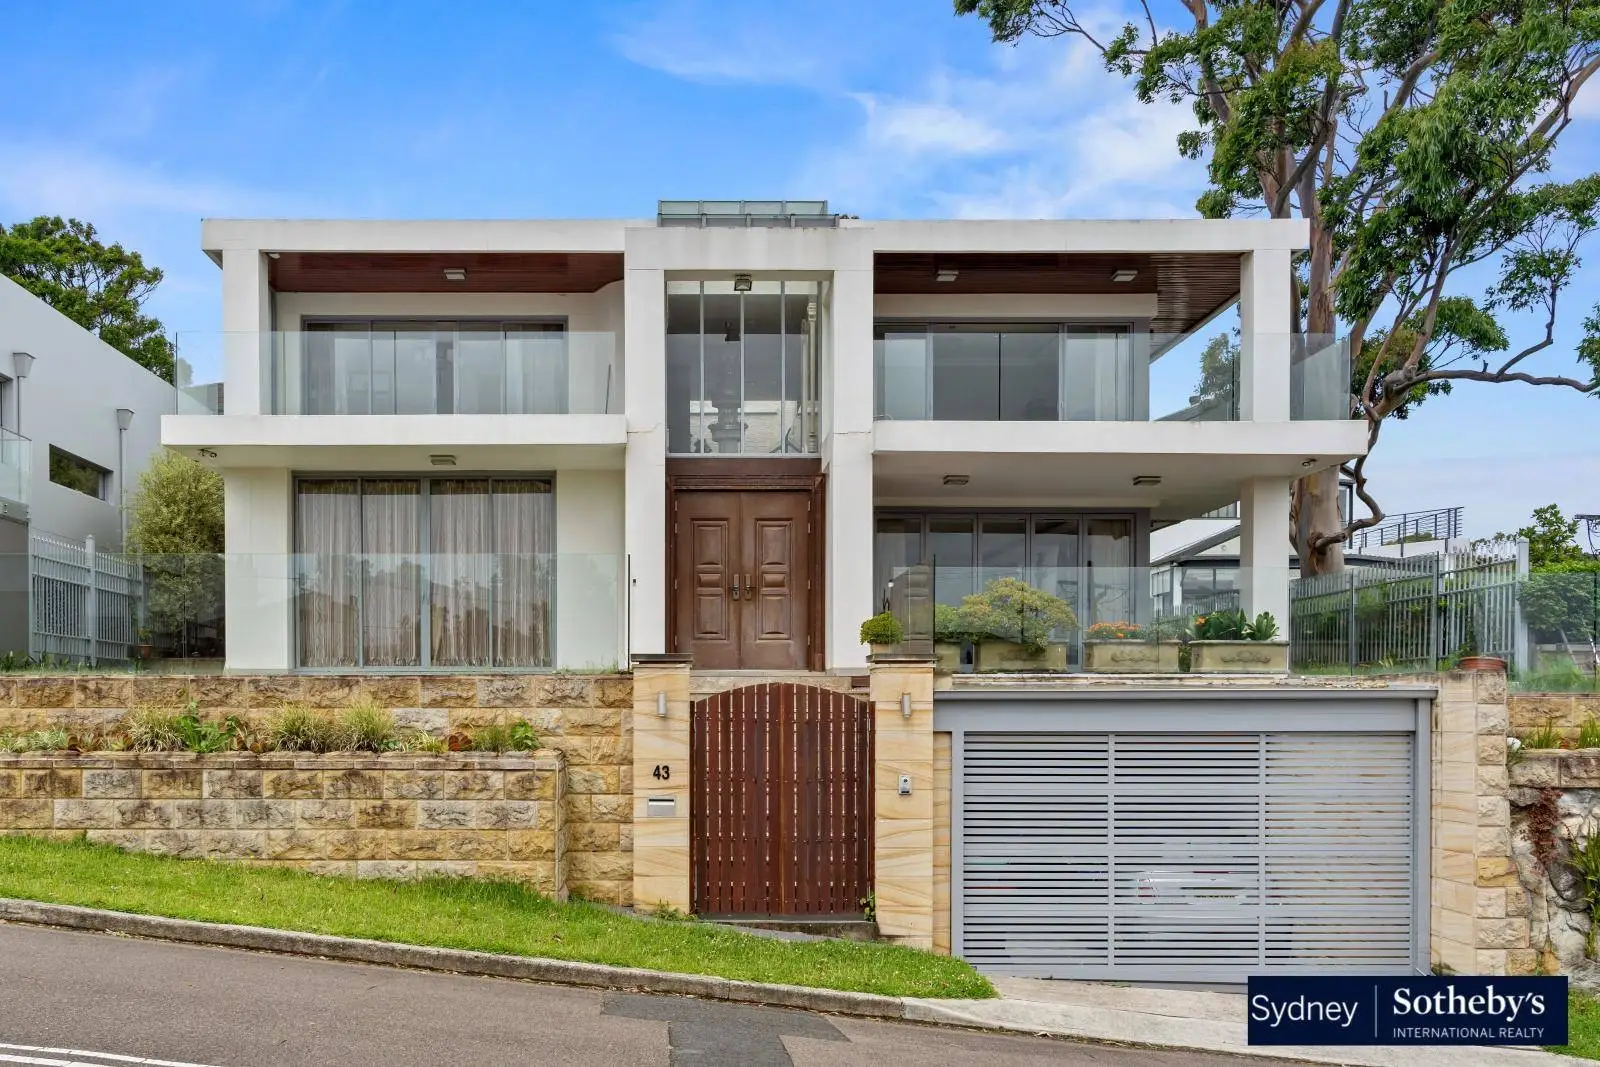 Photo #1: 43 Central Avenue, Mosman - Leased by Sydney Sotheby's International Realty